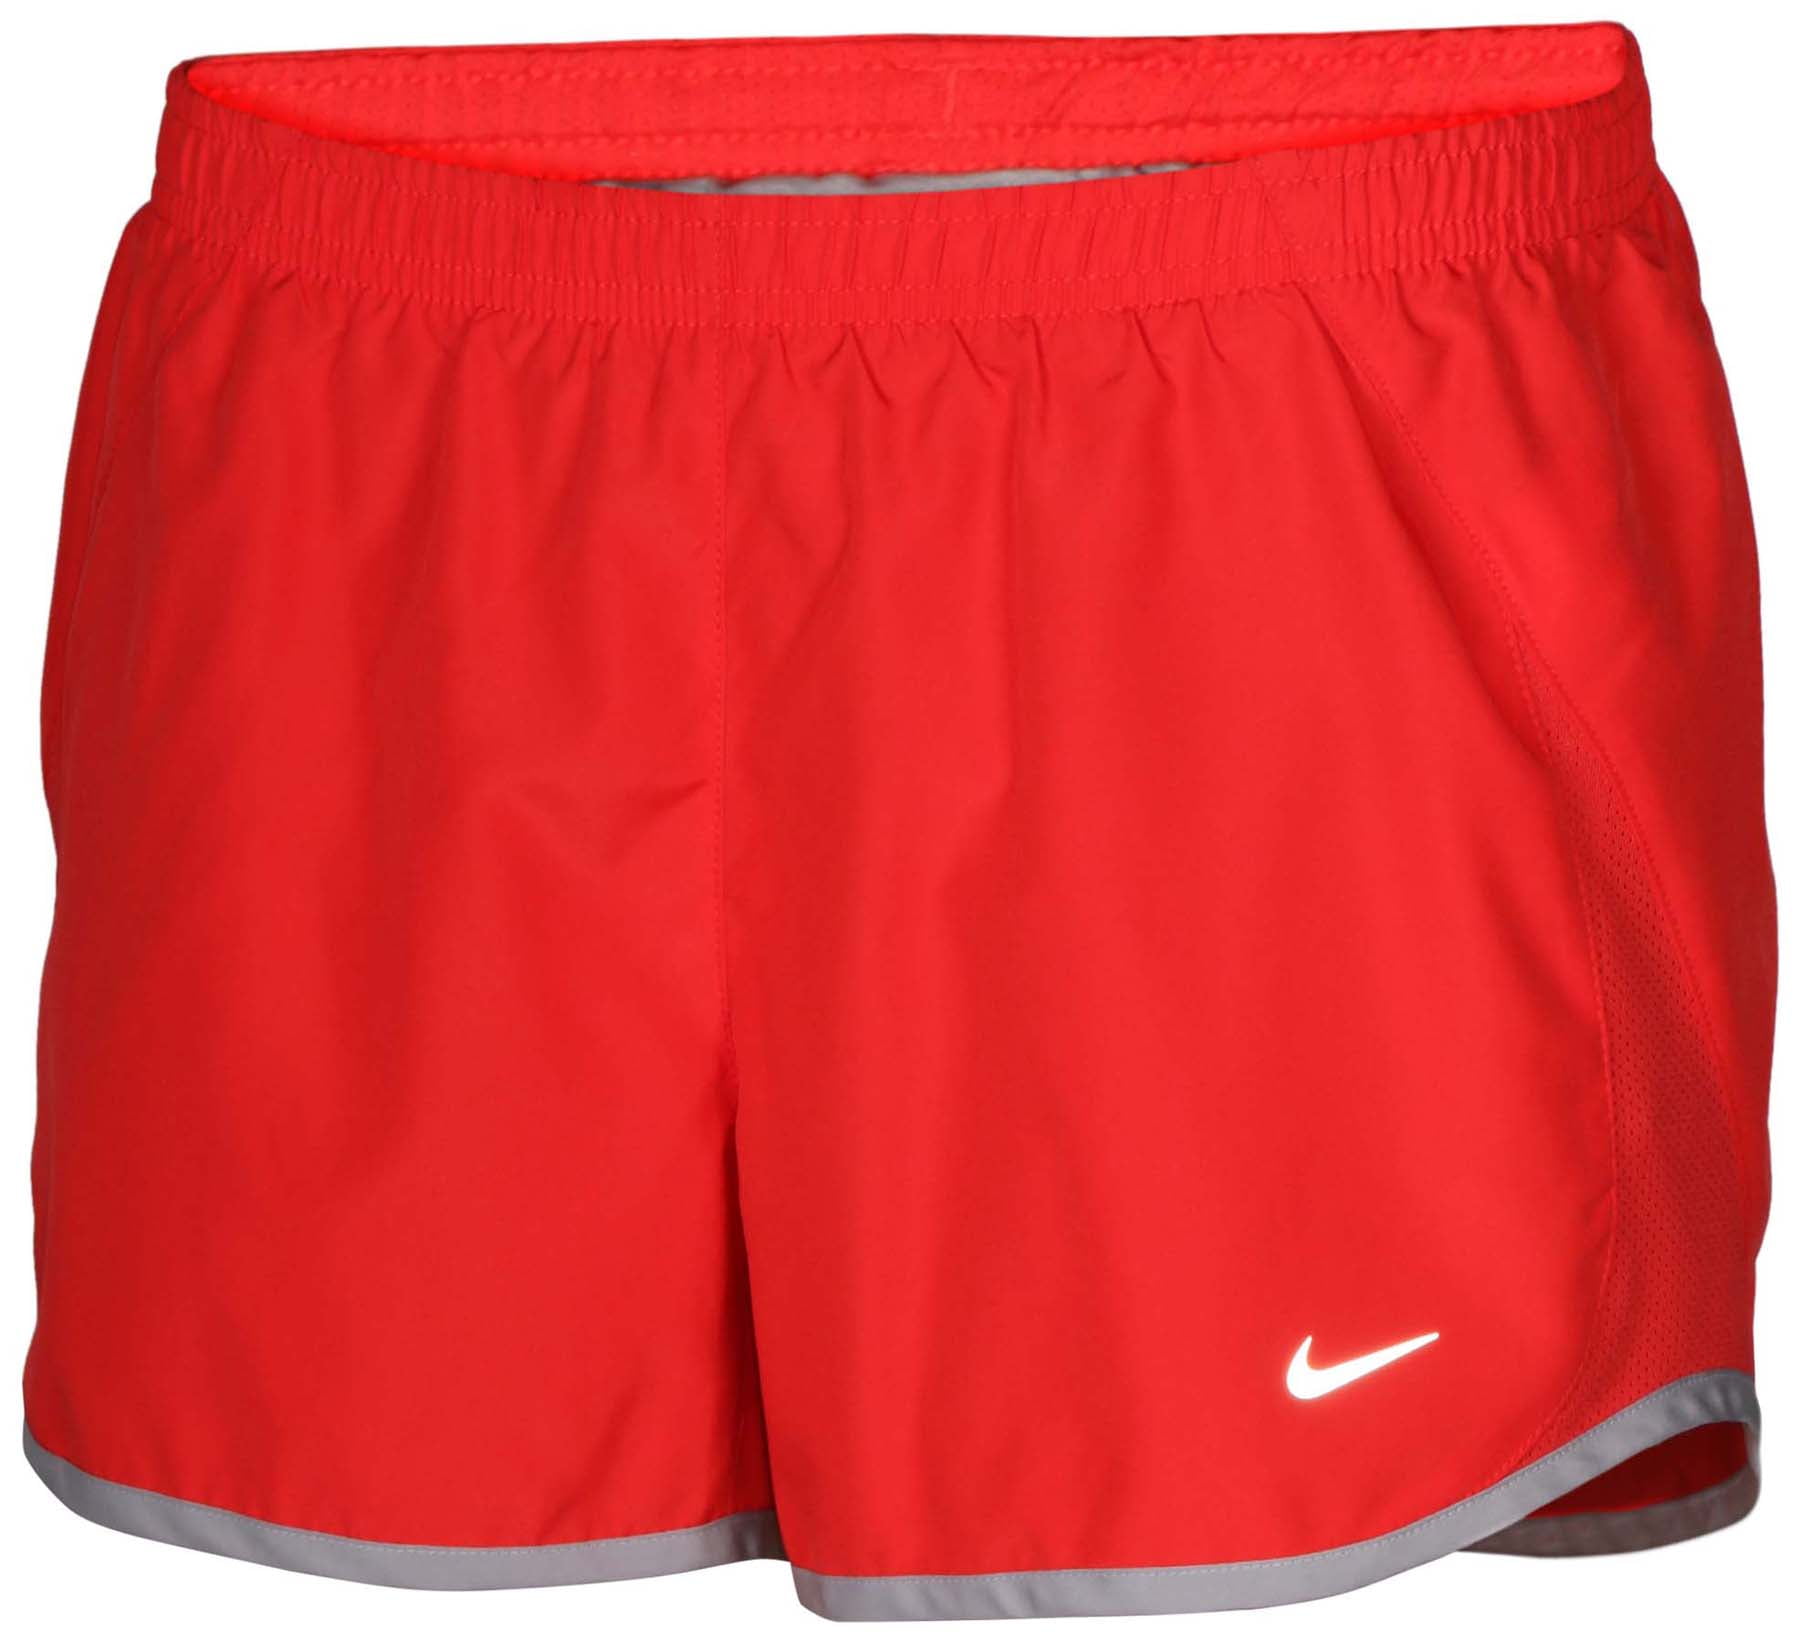 Nike Pacer Lined Built-in-Brief Tempo Running Shorts-Red/Gry - Walmart.com